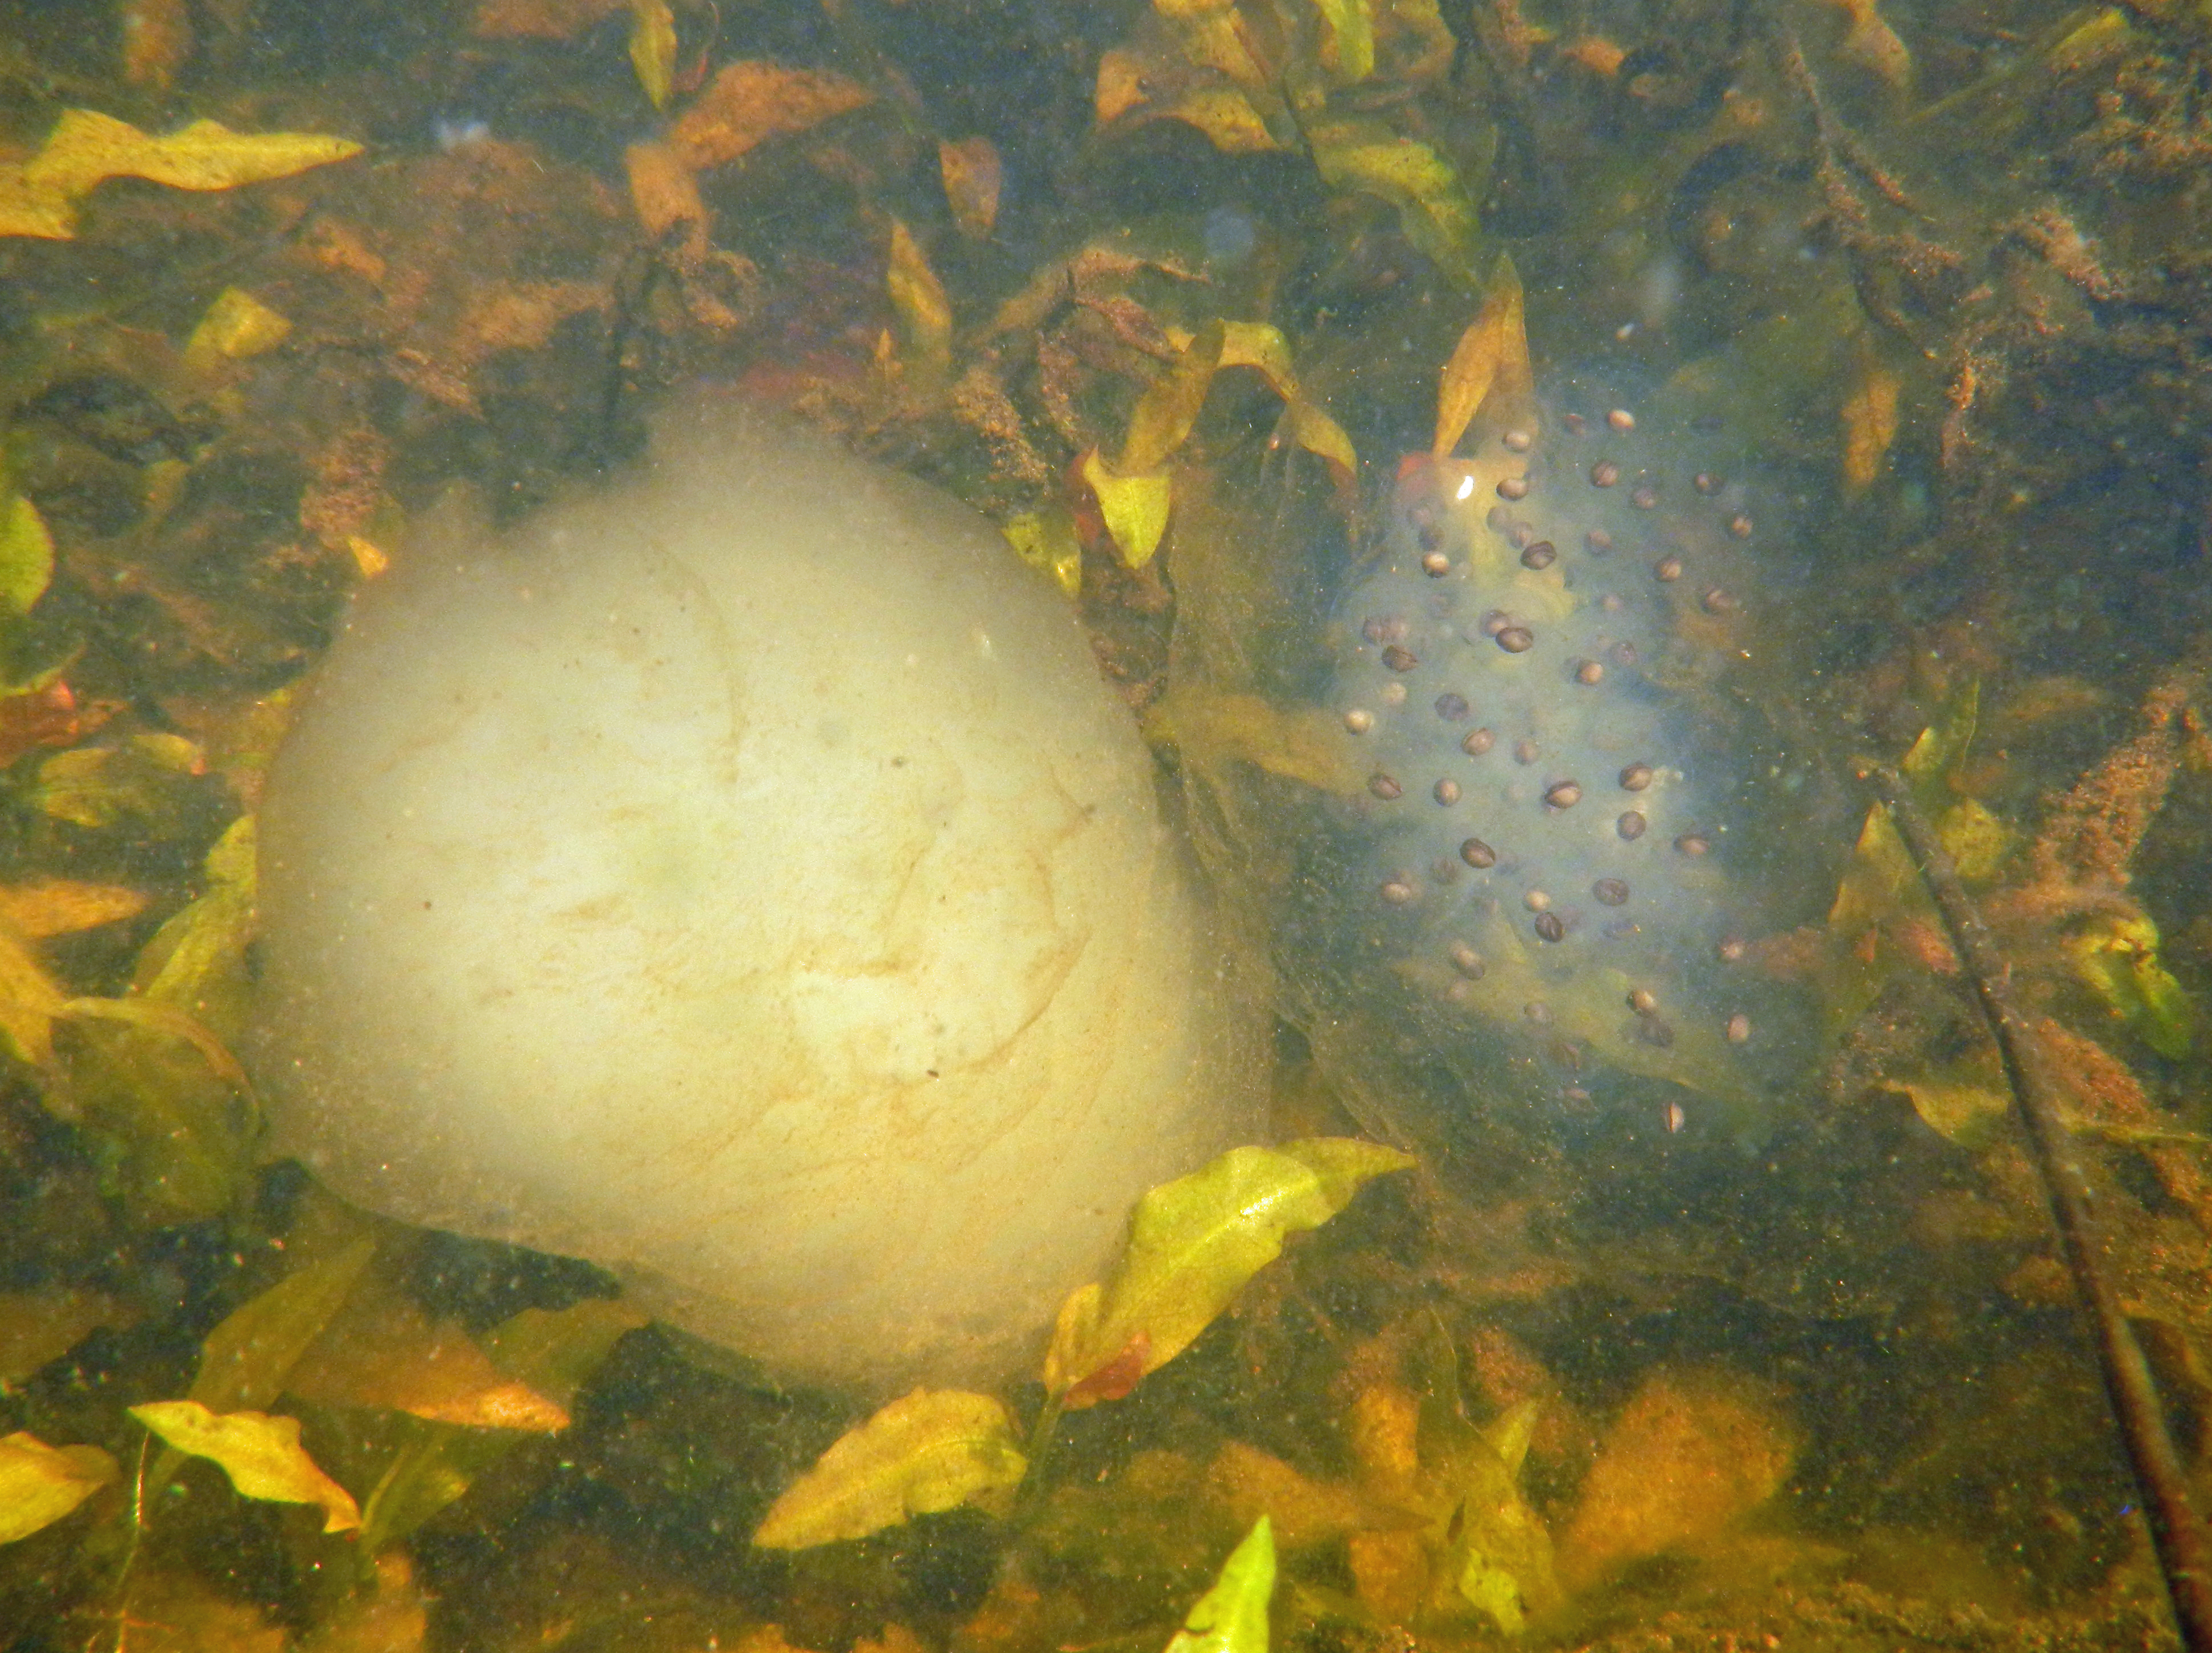 This photograph displays two spotted salamander egg masses underwater in a pond. The two egg masses are shown next to each other with one egg mass being the white morph and the other egg mass being the clear morph.